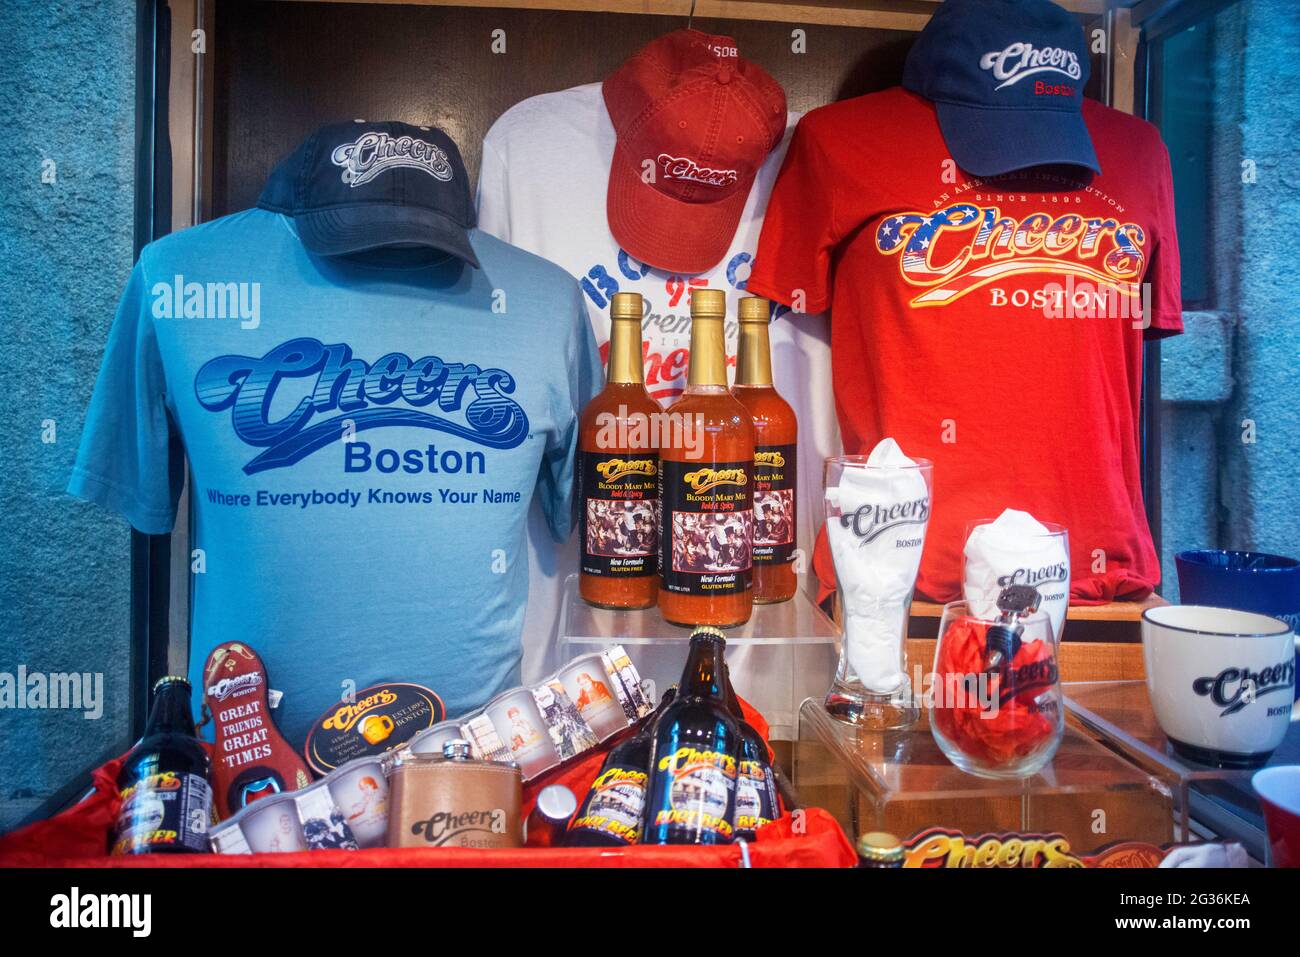 T-shirts, beers, caps, and merchandise in Cheers restaurant Quincy Market Freedom Trail Boston Massachusetts USA.  Cheers is an American sitcom televi Stock Photo